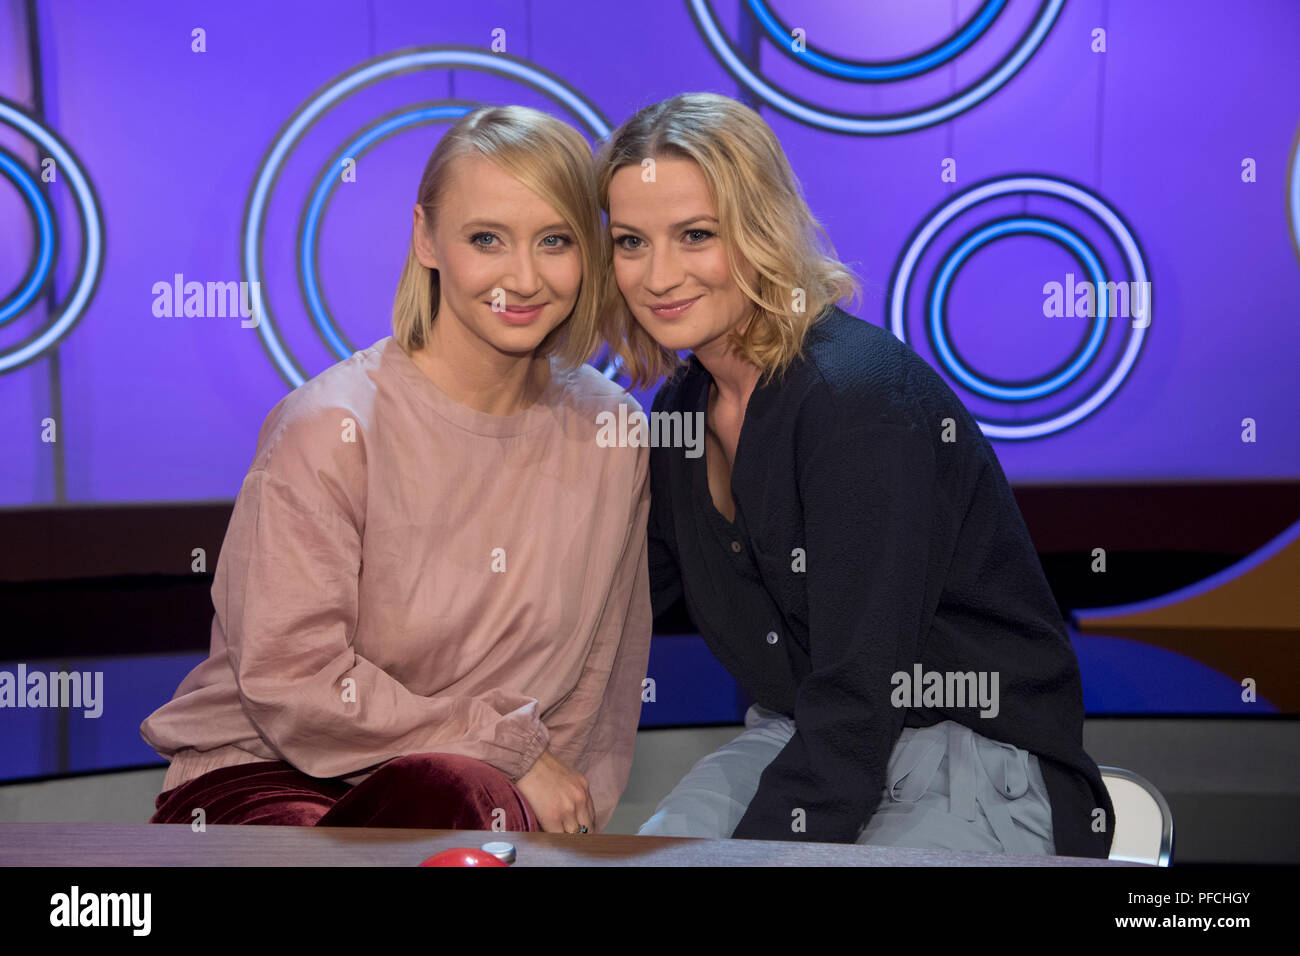 From Left Anna Maria Muehe Ma He Germany Actress Nina Gummich Germany Actress Guest Of The Show Dingsda Television Program Recorded On 22 06 2018 In Koeln Usage Worldwide Stock Photo Alamy